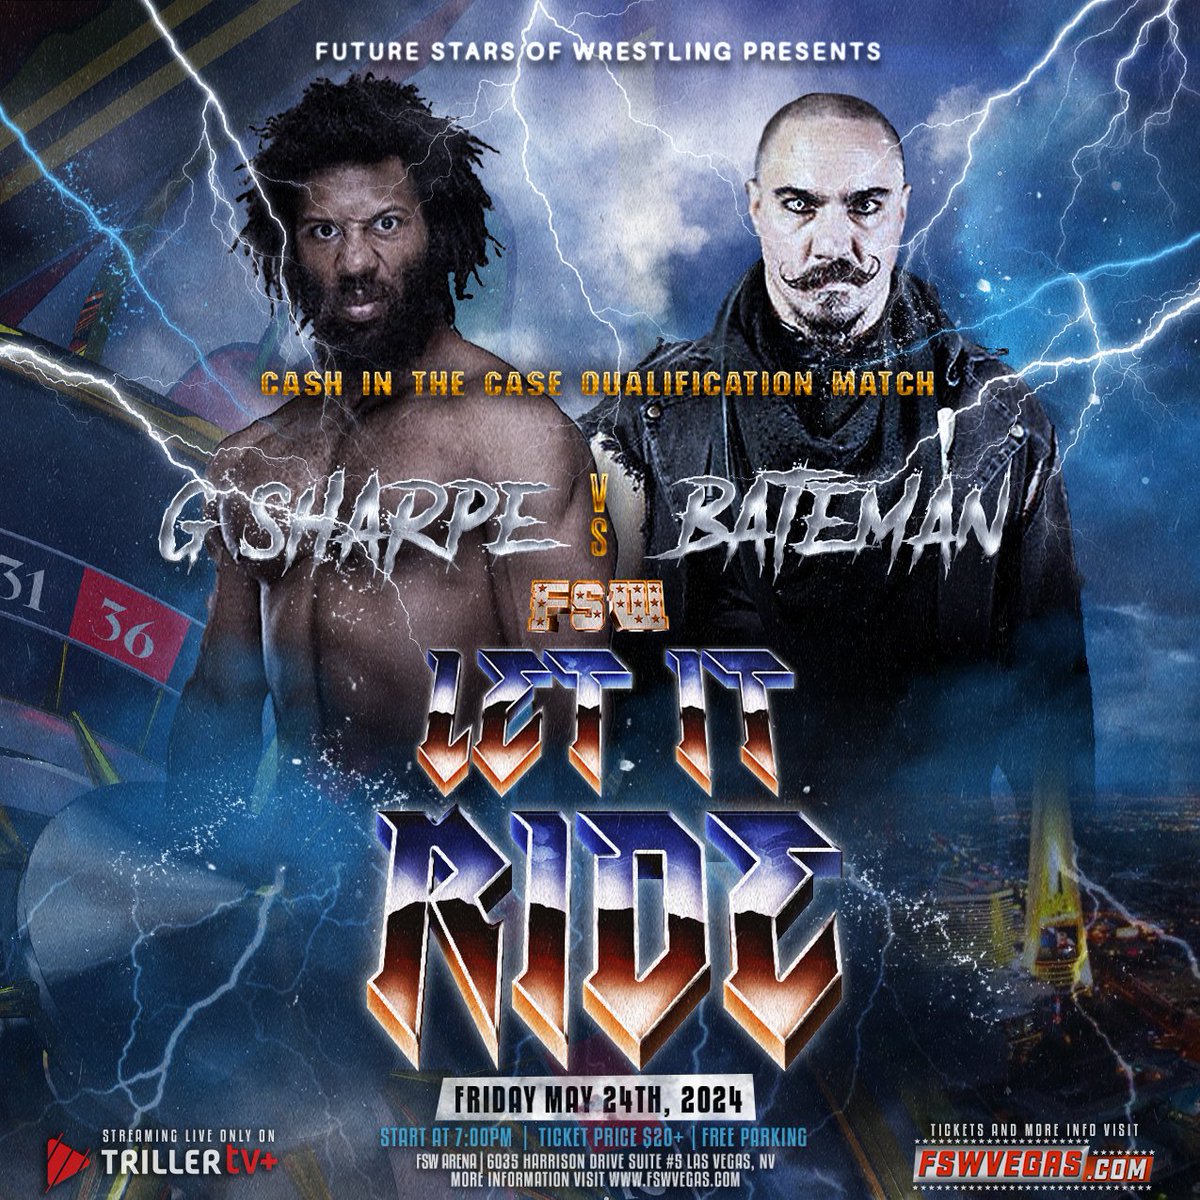 THIS FRIDAY! 𝘾𝙖𝙨𝙝 𝙞𝙣 𝙩𝙝𝙚 𝘾𝙖𝙨𝙚 𝙌𝙪𝙖𝙡𝙞𝙛𝙞𝙚𝙧 @imoldgregsharpe VS Bateman FSW Let It Ride This Friday May 24, 7PM PST LIVE on @FiteTV+ FSW Arena | #LasVegas Tickets + Streaming links in the bio!